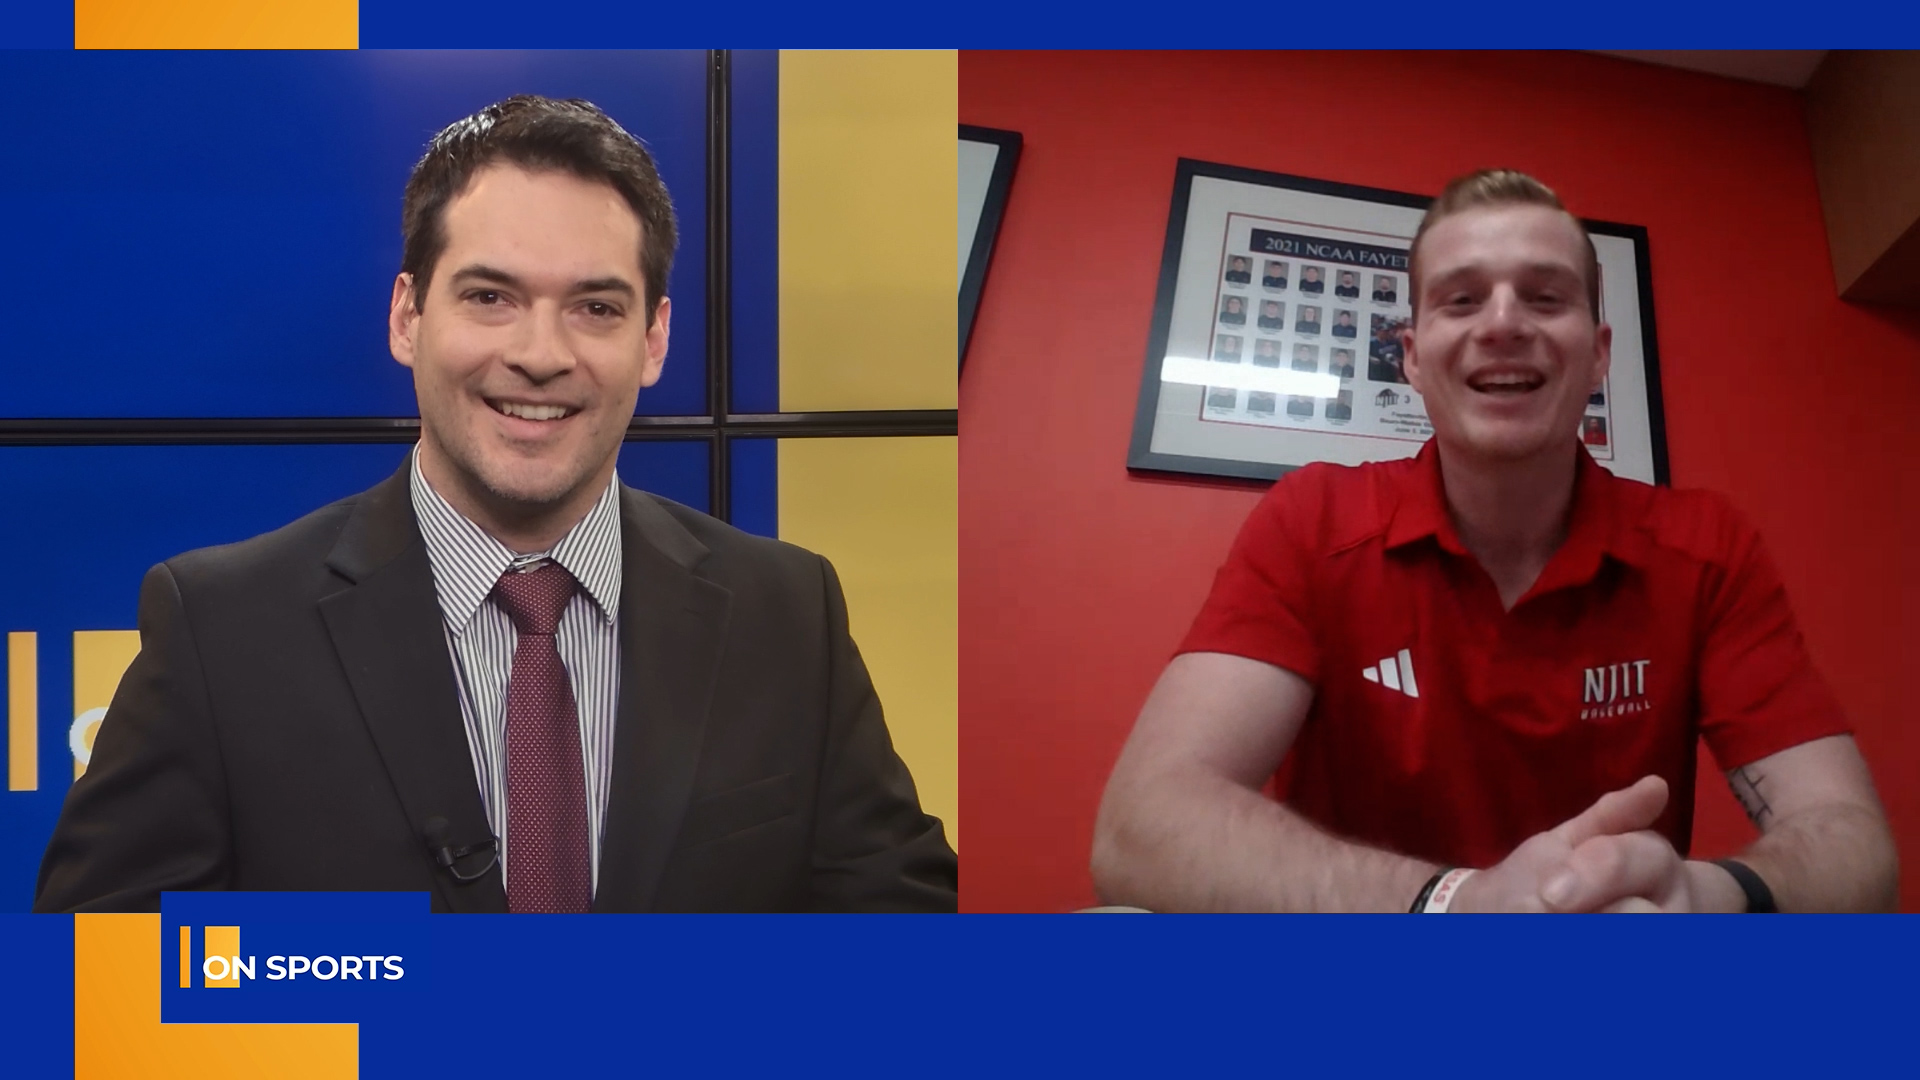 On Sports – Interview with NJIT Highlanders Catcher Luke...